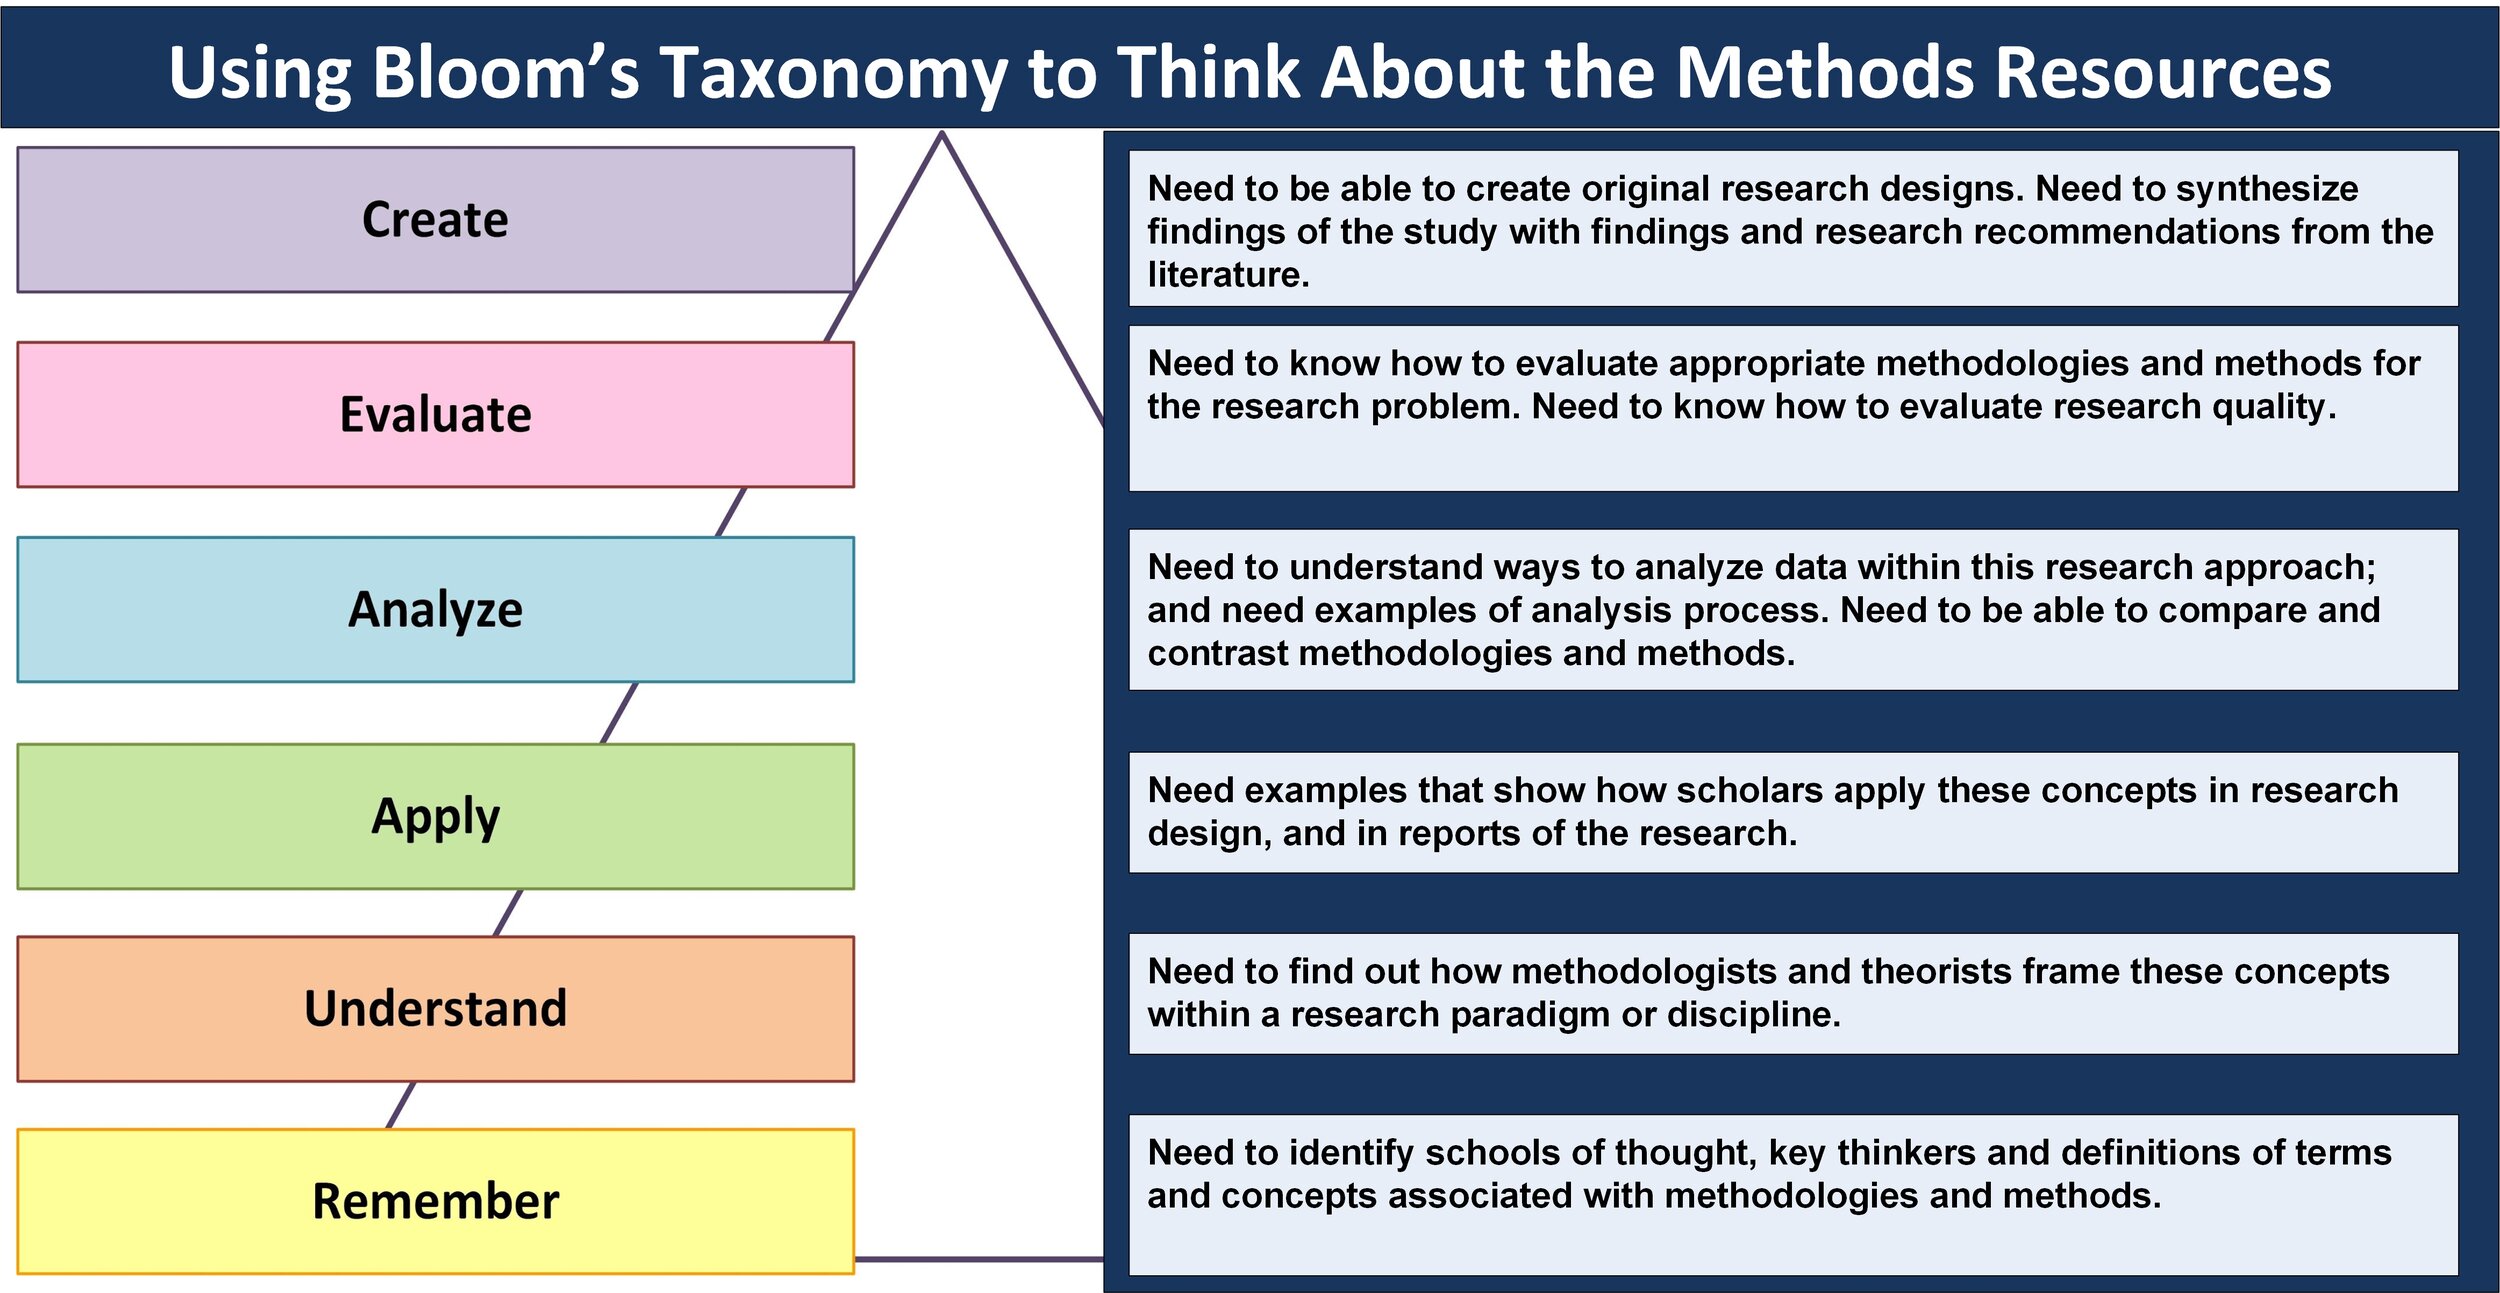 Blooms Taxonomy and research videos